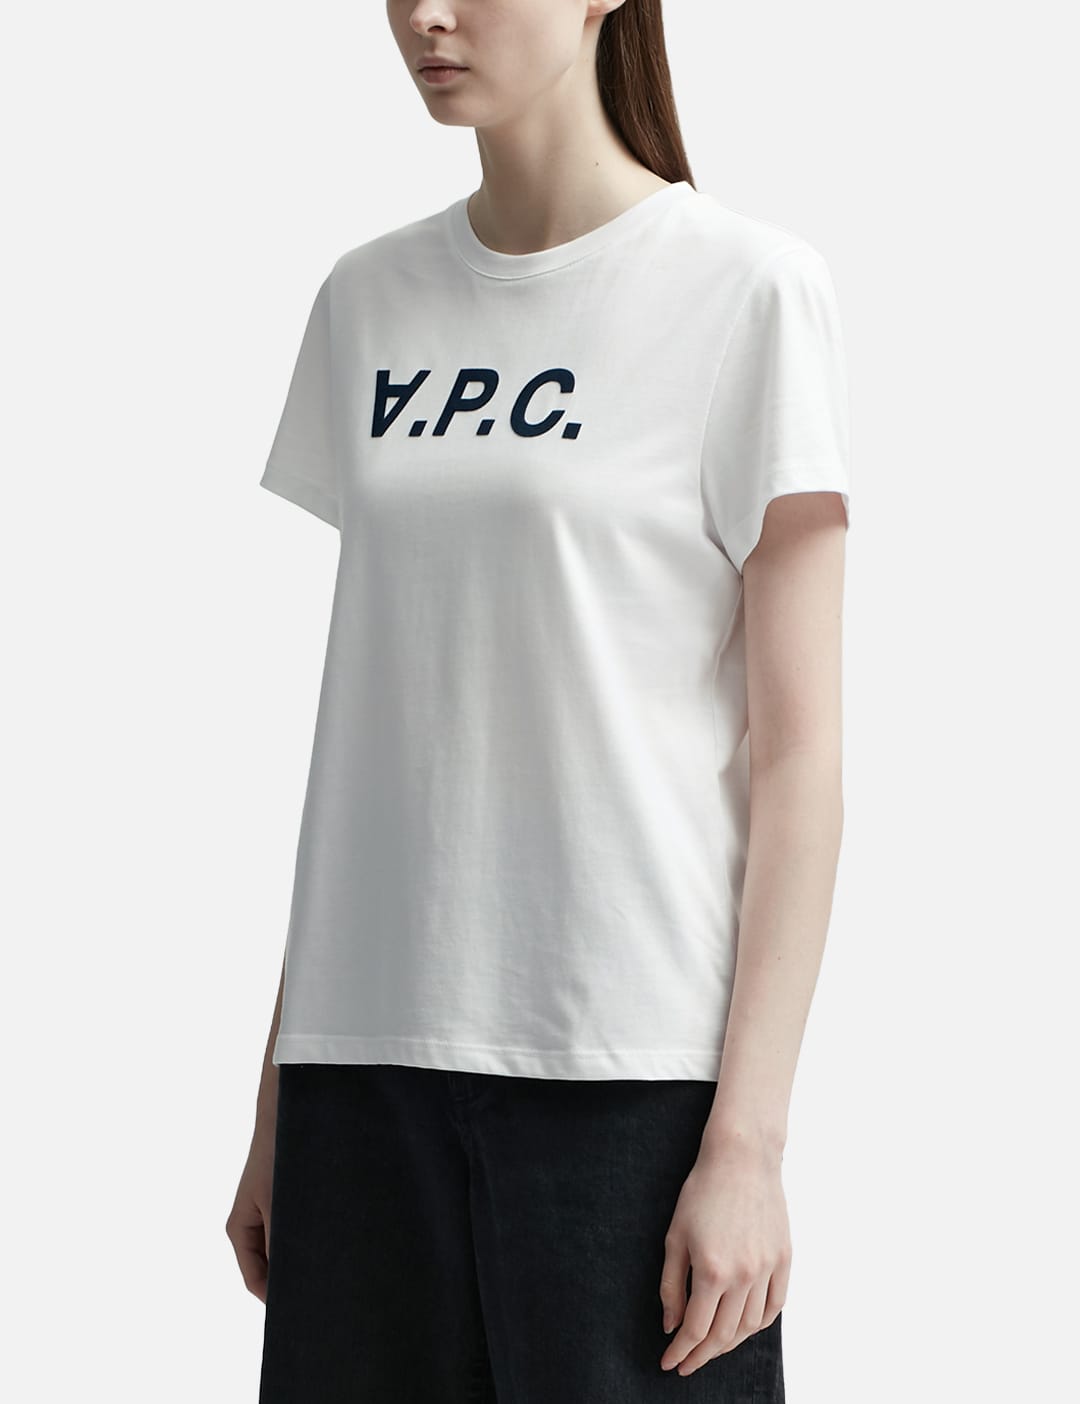 A.P.C. - VPC Blanc F T-shirt | HBX - Globally Curated Fashion and